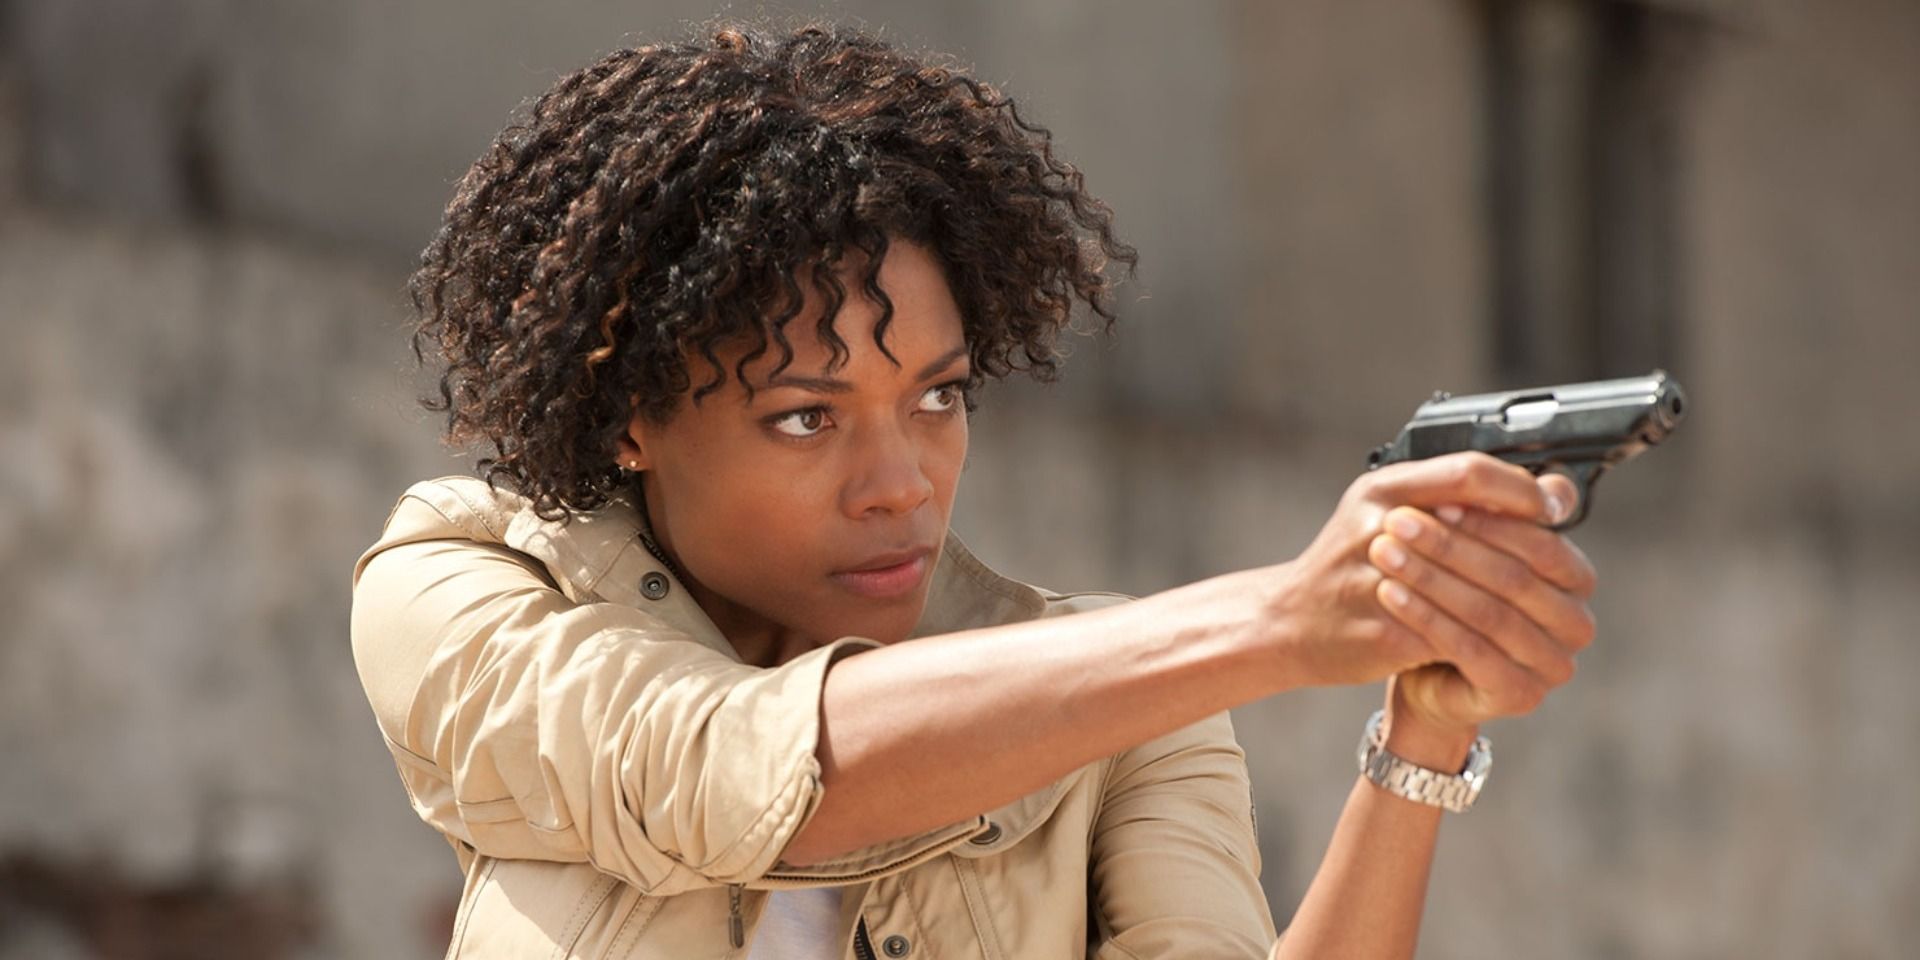 Moneypenny pointing a gun in Skyfall